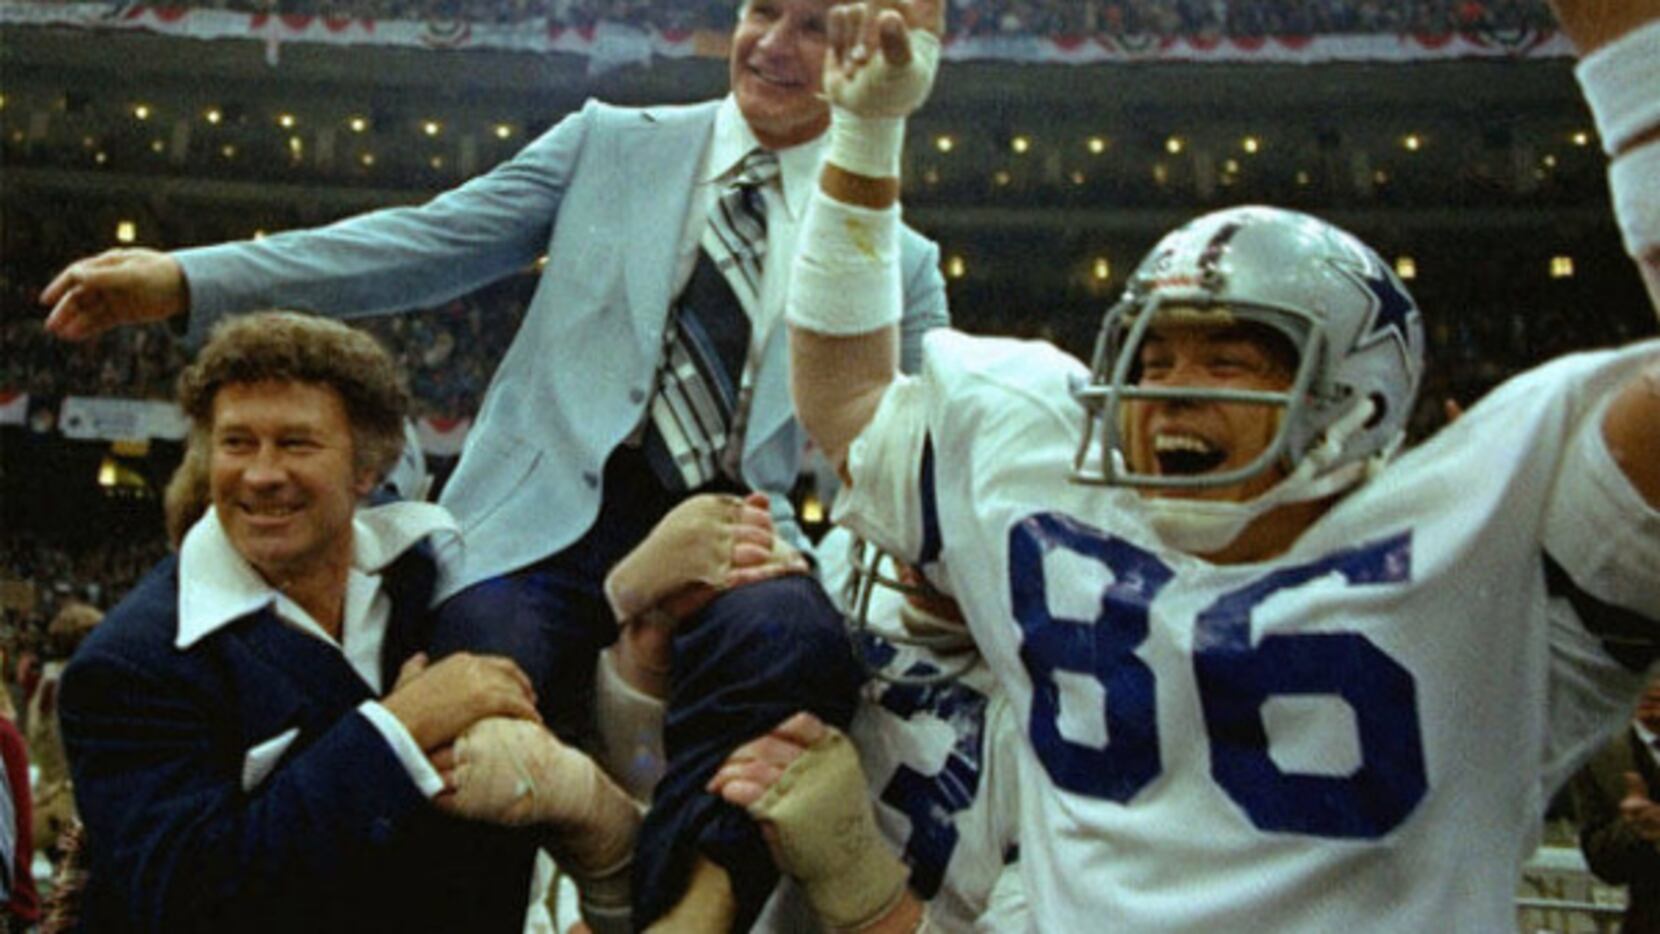 How The Dallas Morning News covered Super Bowl XII: Cowboys 27, Broncos 10